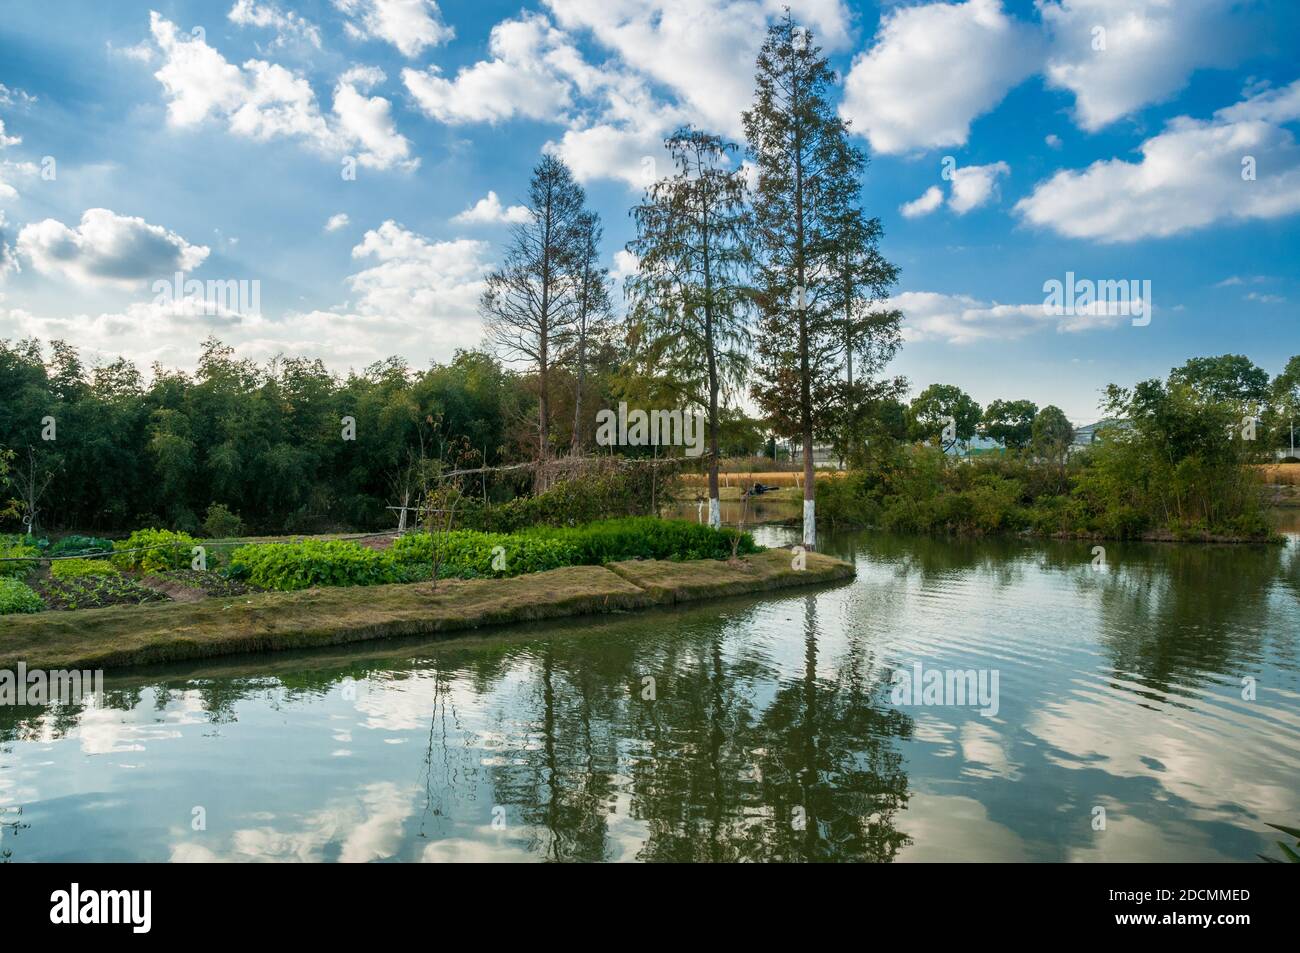 A rural scene along a waterway in Shanghai’s Pudong New Area. Stock Photo